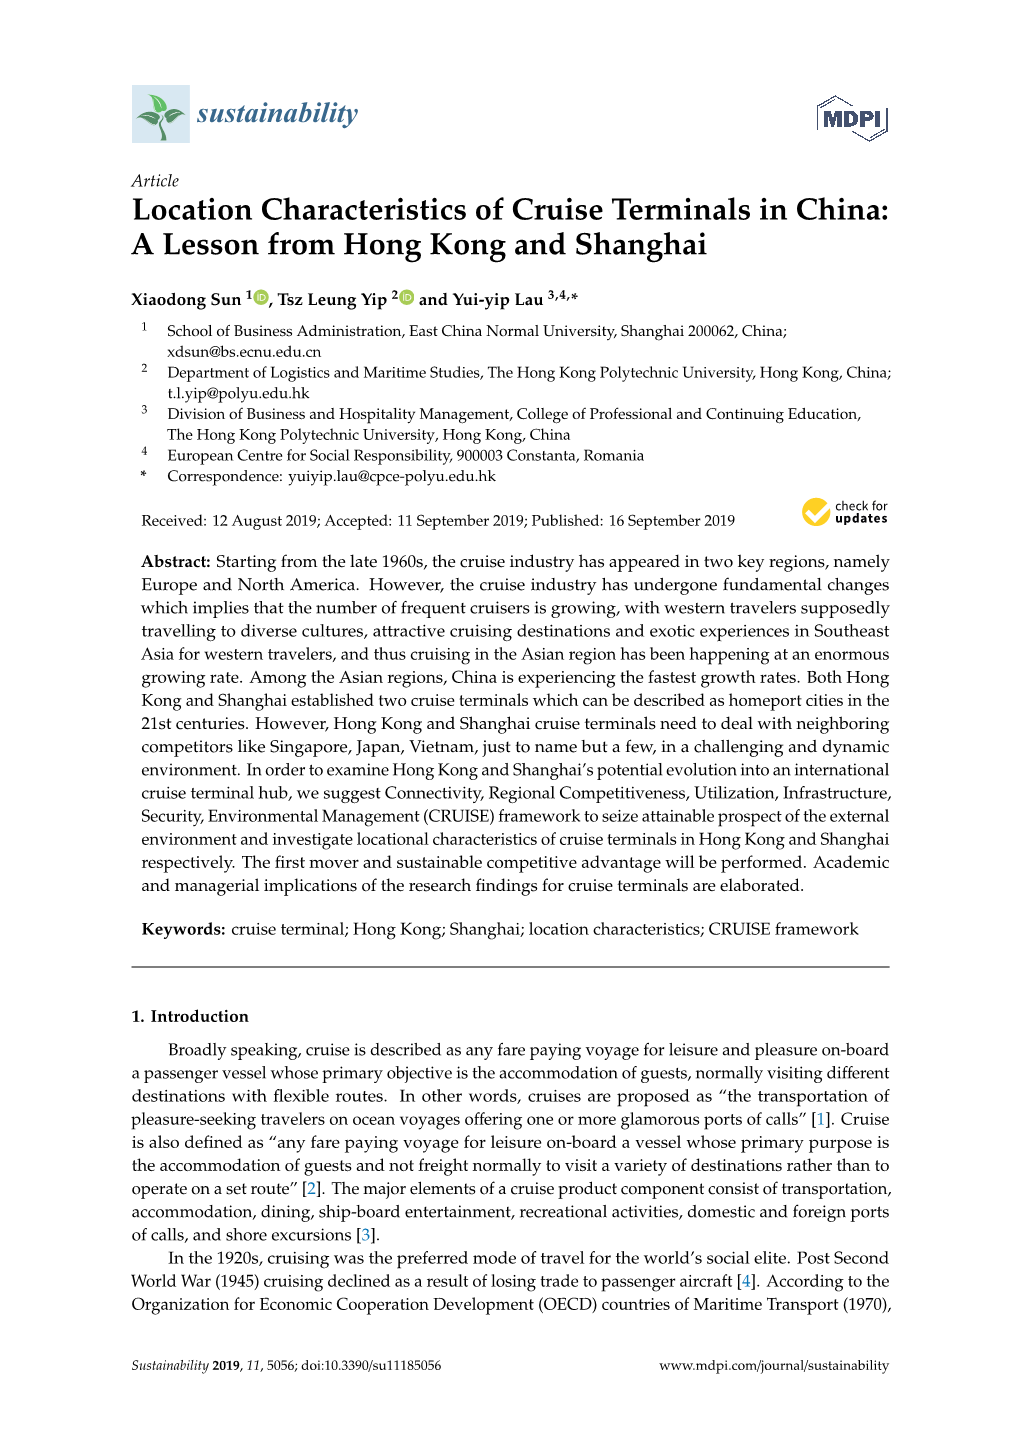 Location Characteristics of Cruise Terminals in China: a Lesson from Hong Kong and Shanghai